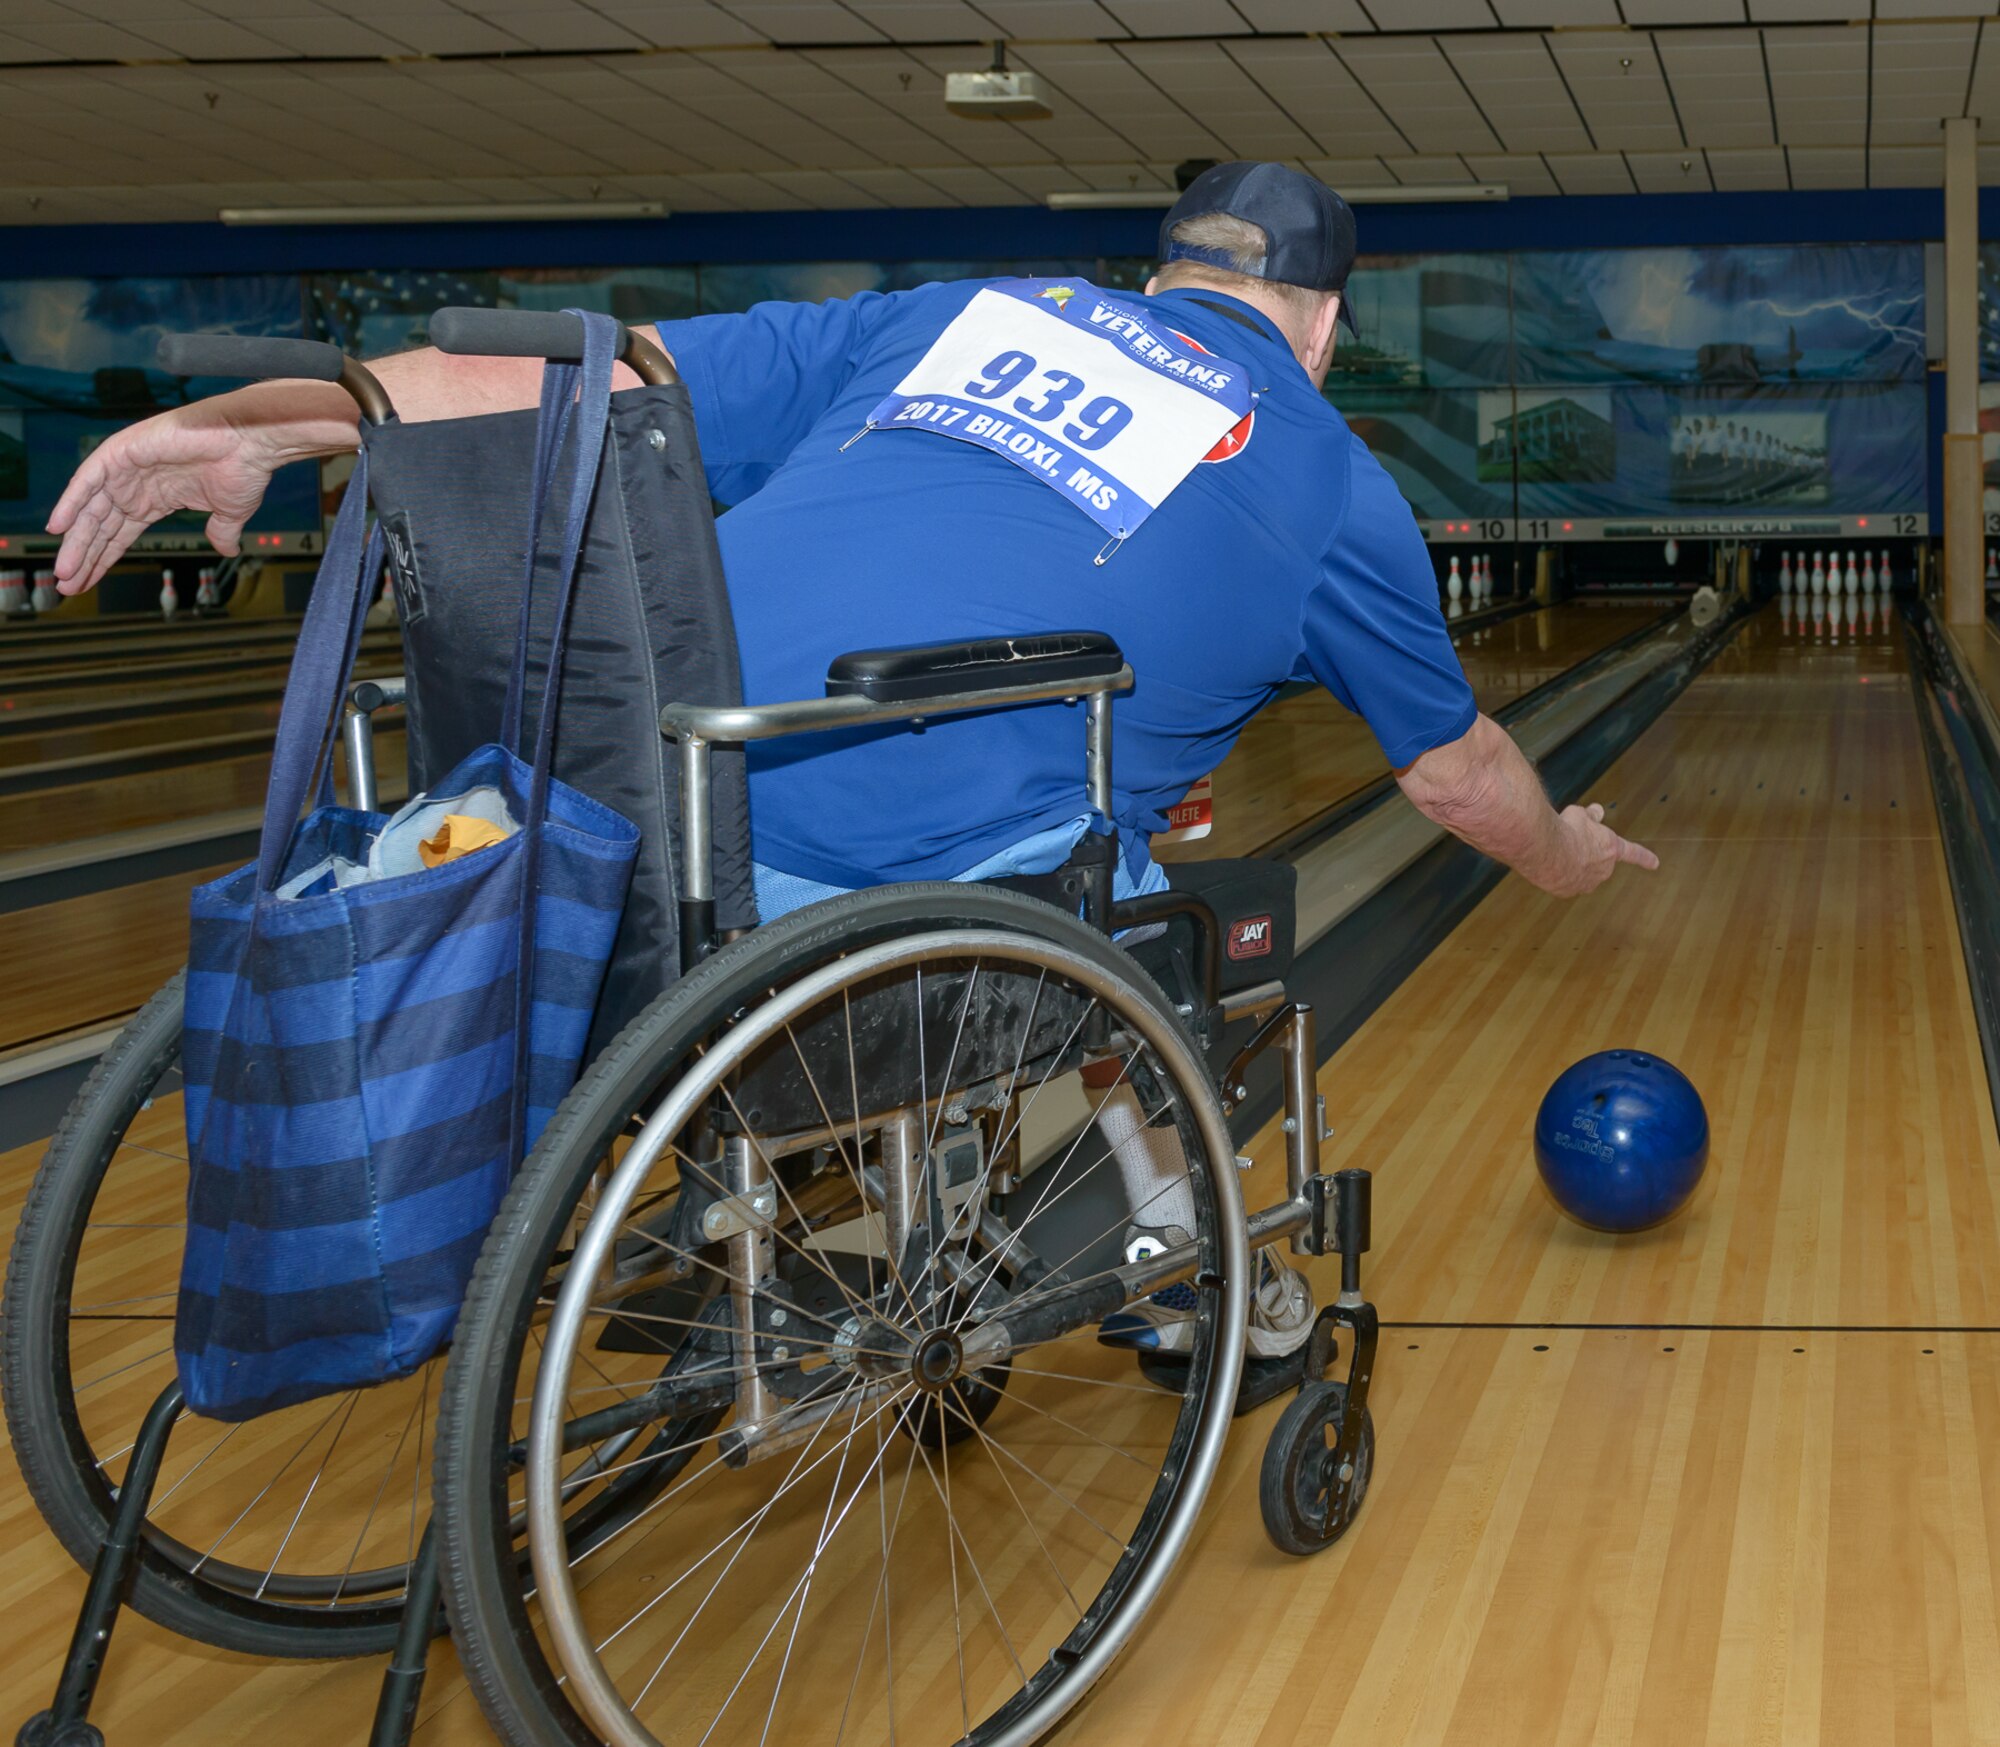 Jim Brown, Iowa-region bowler, bowls during the National Veterans Golden Age Games (NVGAG) at Gaudé Lanes May 10, 2017, on Keesler Air Force Base, Miss. This is Keesler’s first time hosting a sporting event for the NVGAG, an adaptive rehabilitation program sponsored by the U.S. Department of Veterans Affairs, in their 31-year history. (U.S. Air Force photo by Andre' Askew)     

